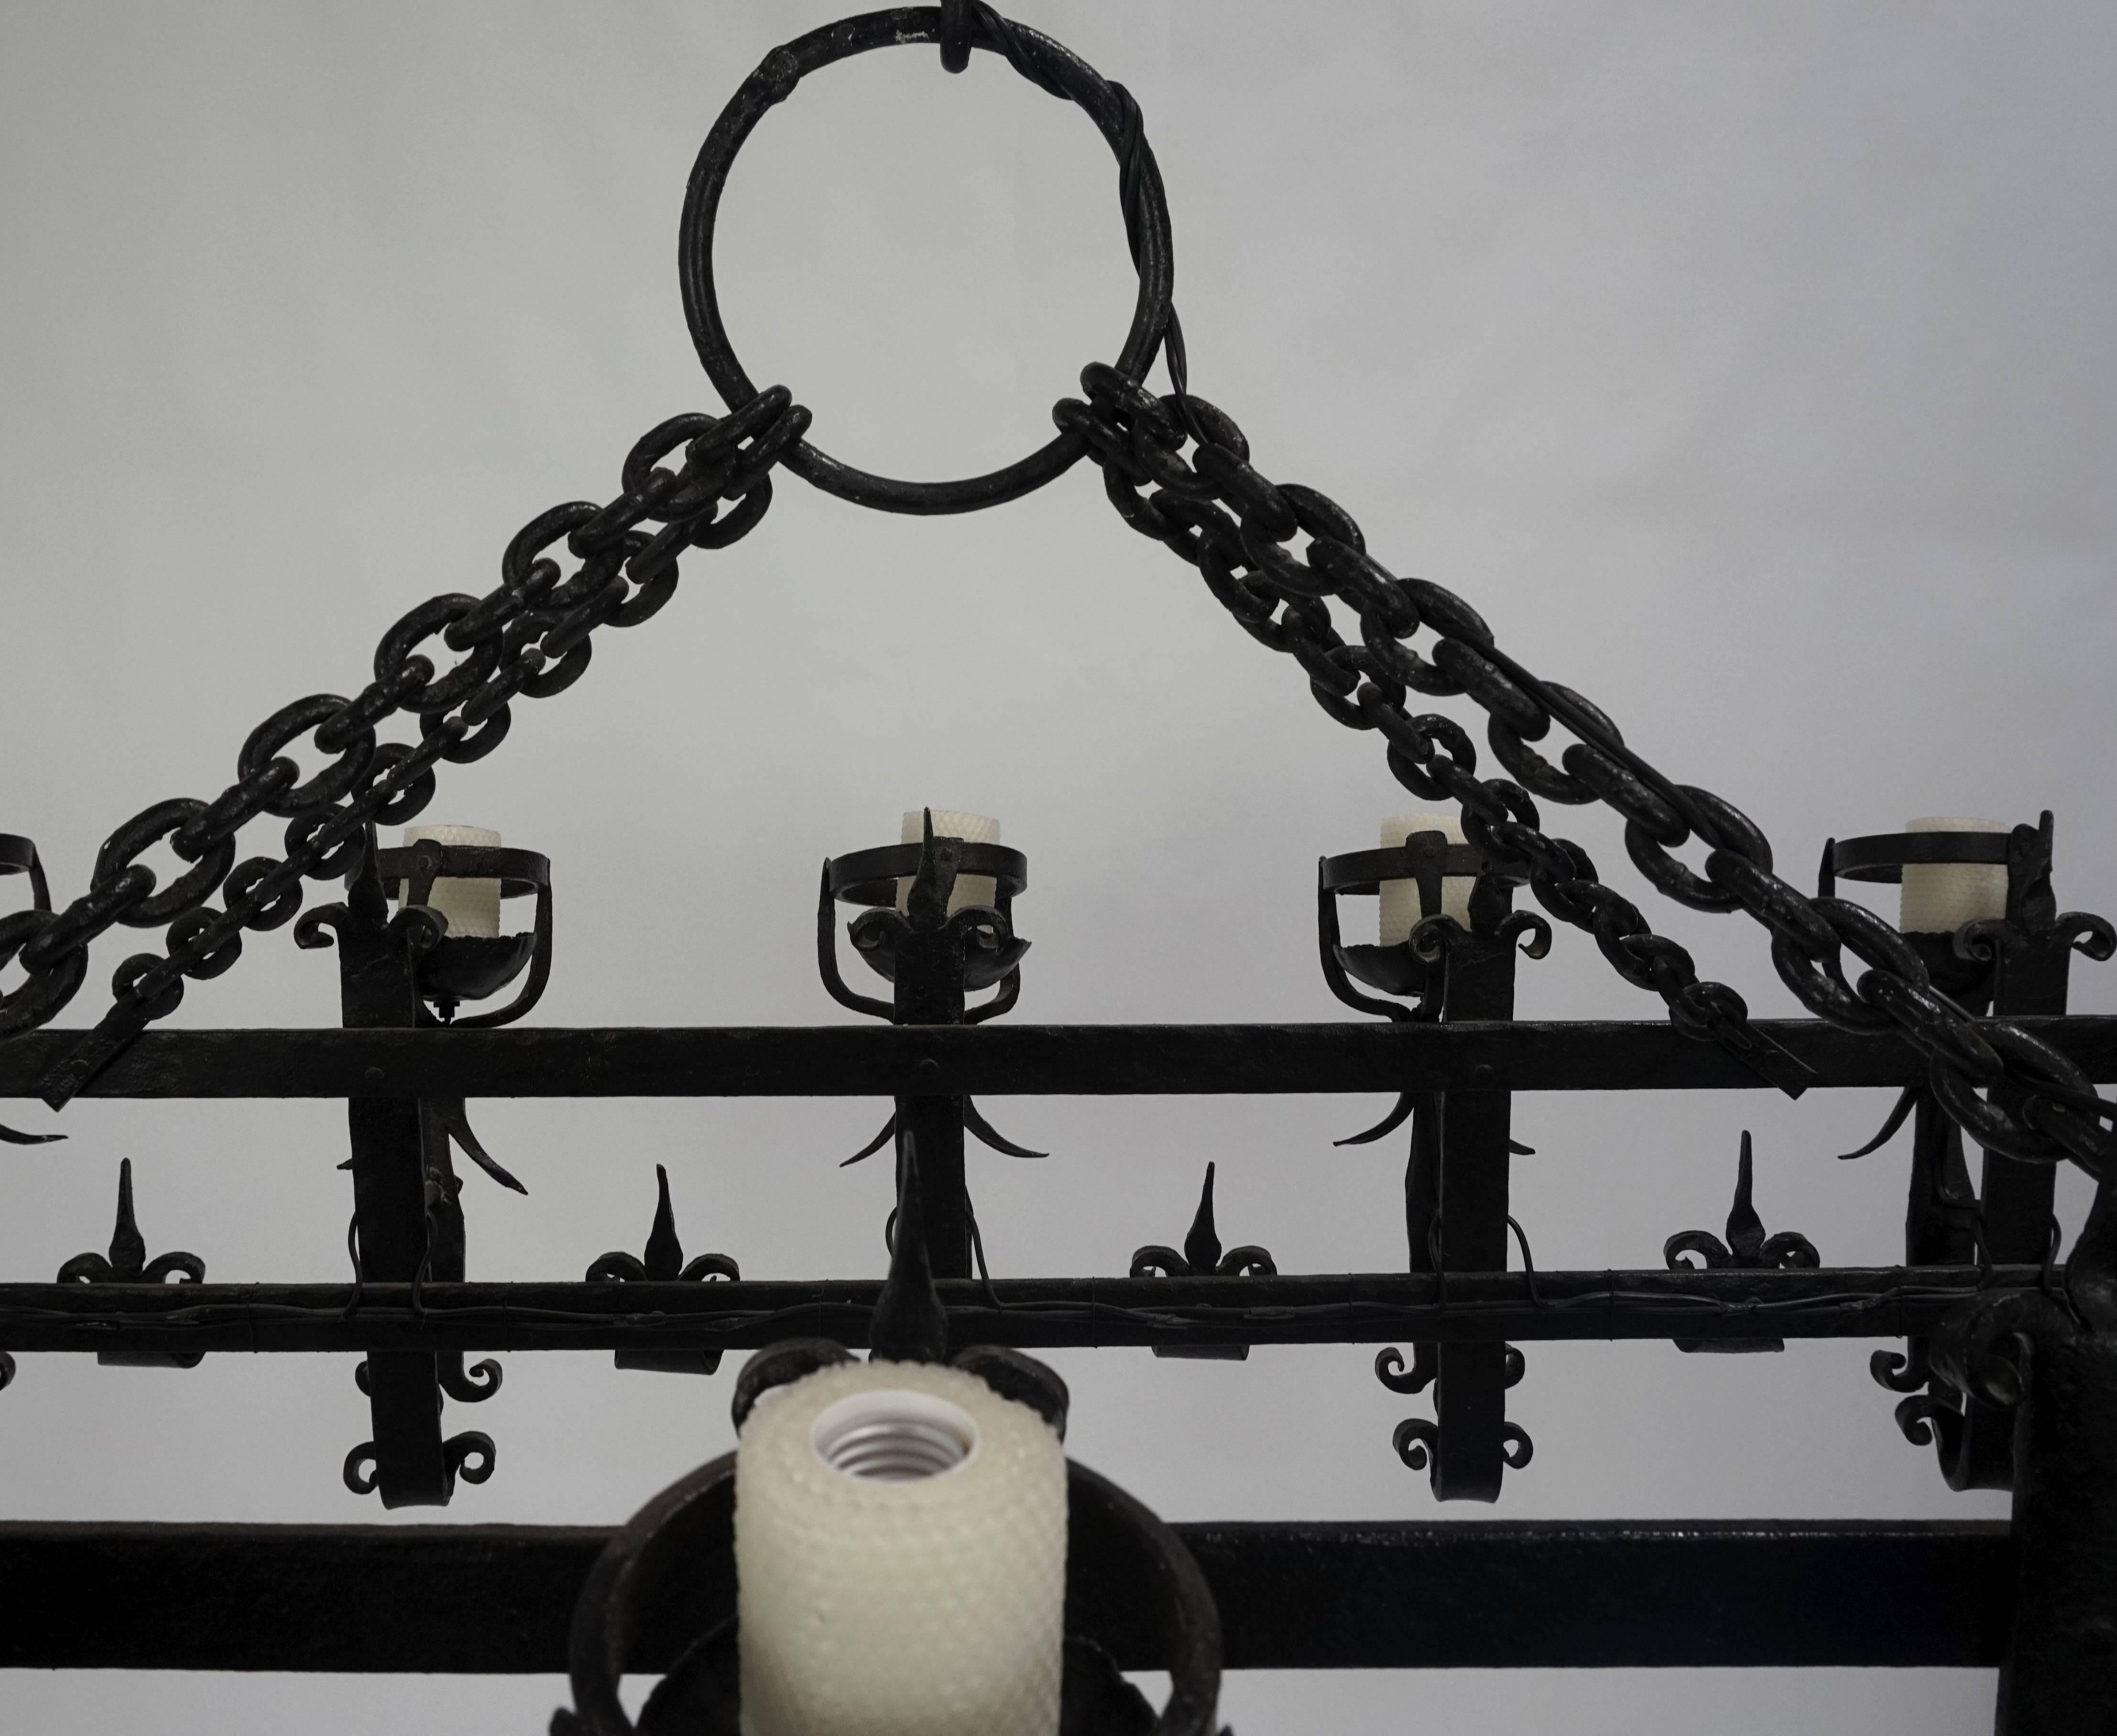 A heavy, iron chandelier in medieval revival and Henry III styles; hand wrought decoration, with honeycomb wax candle sleeves and heavy chain, 14 light. American, Beverly Hills, ca. 1915. Chandelier weighs 160lbs.